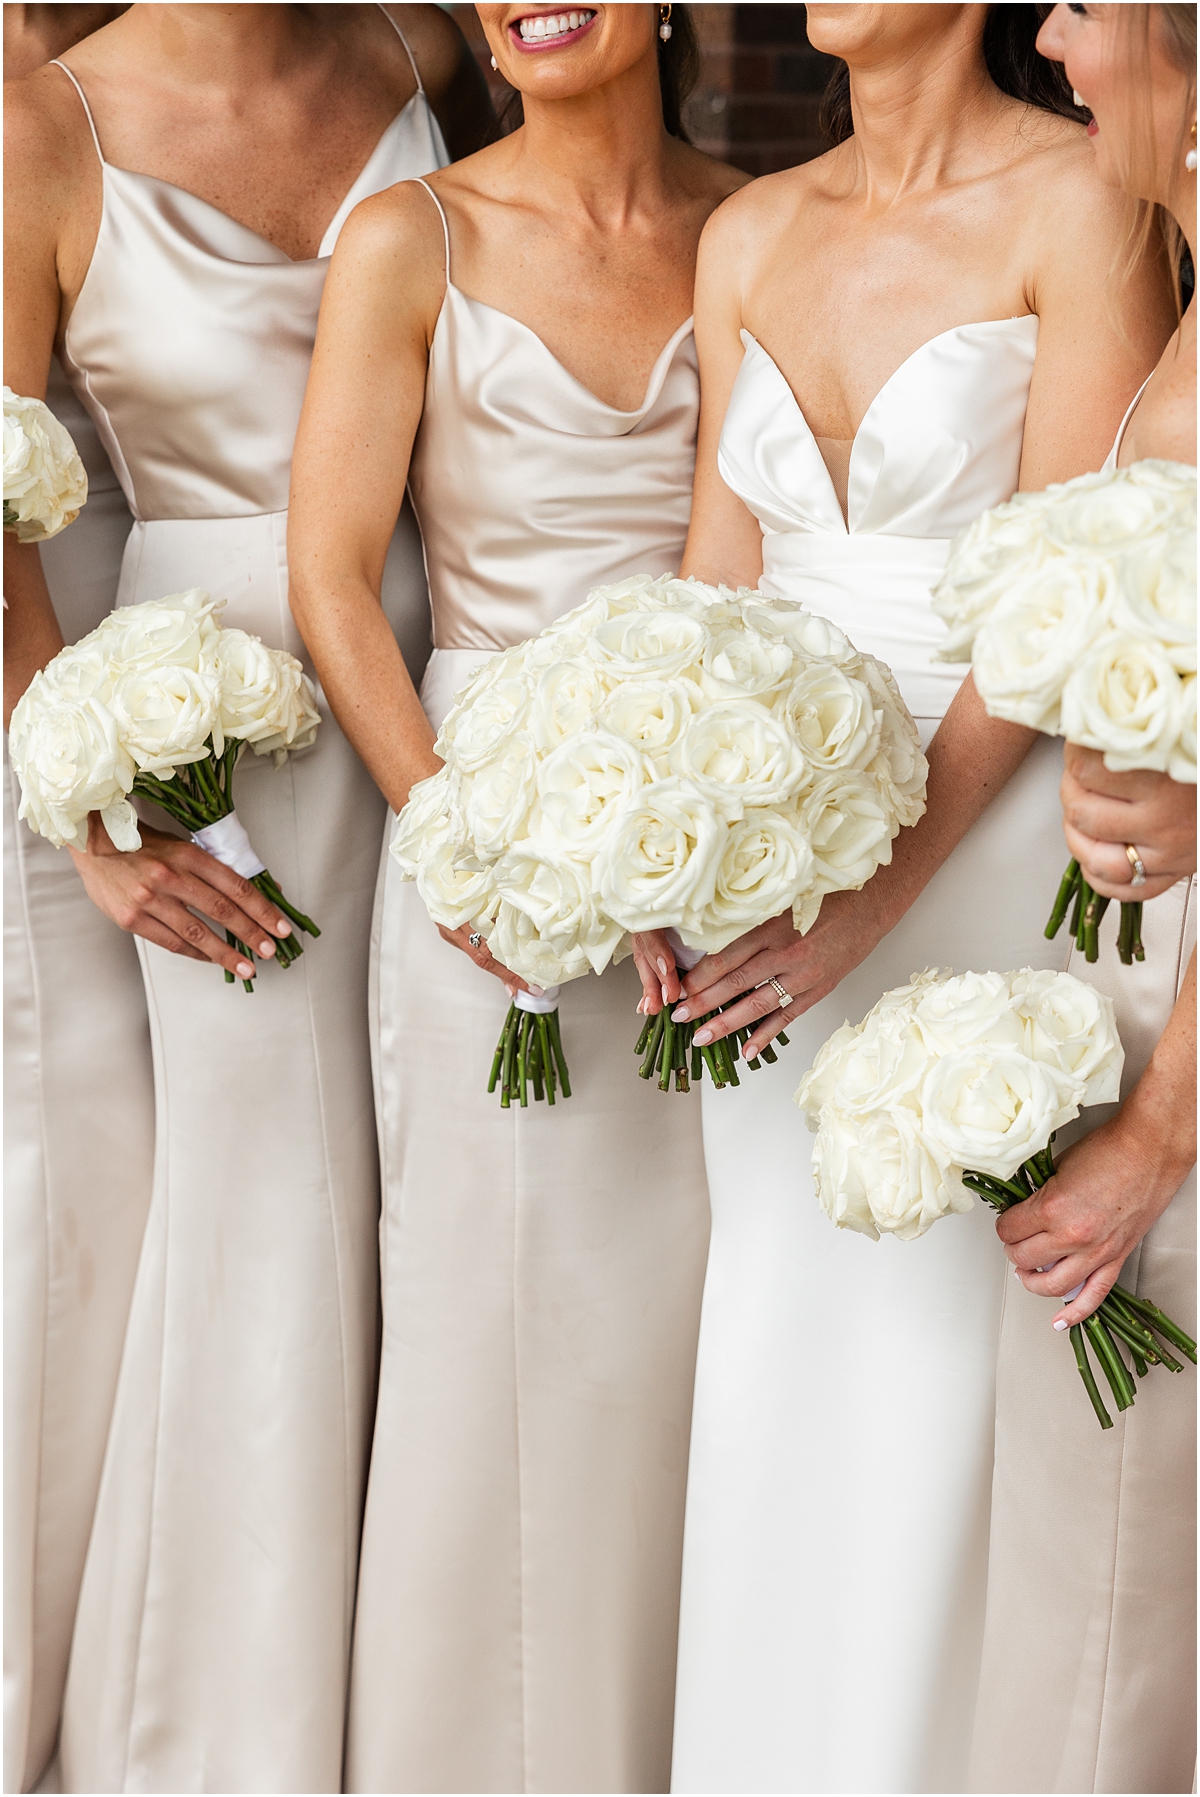 classic wedding bouquets of white long-stemmed roses